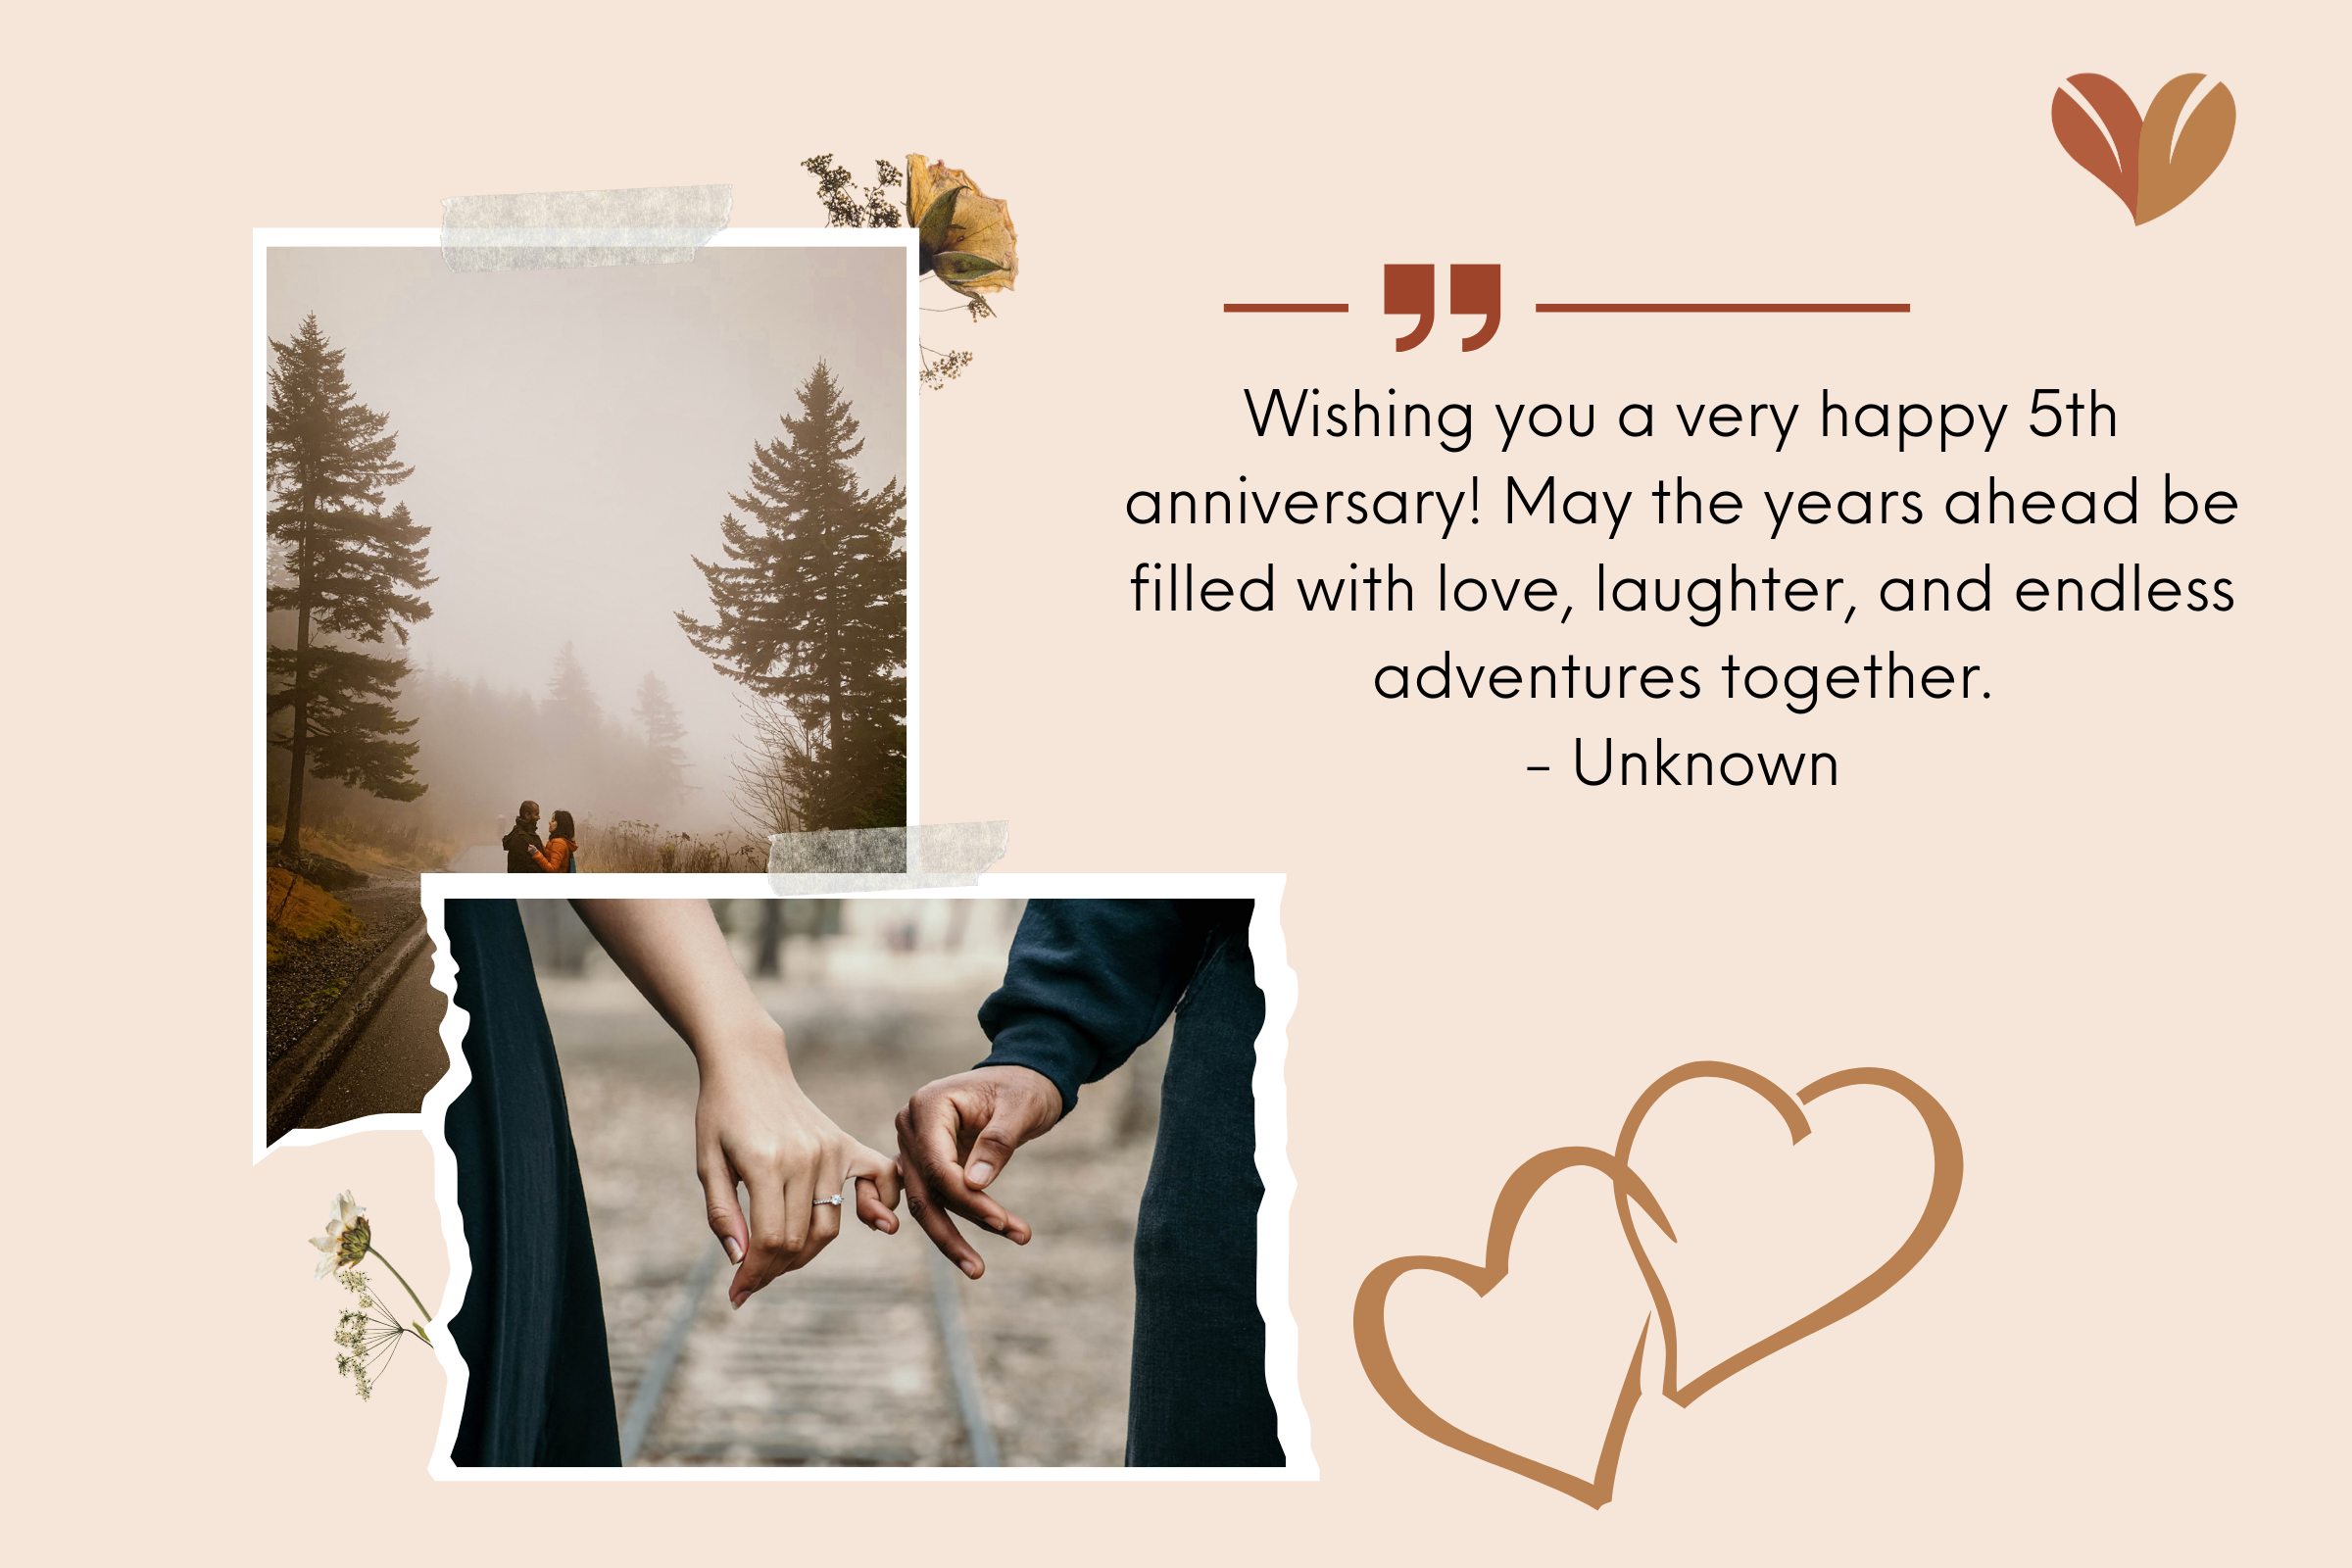 Sending warming wishes to happy anniversary